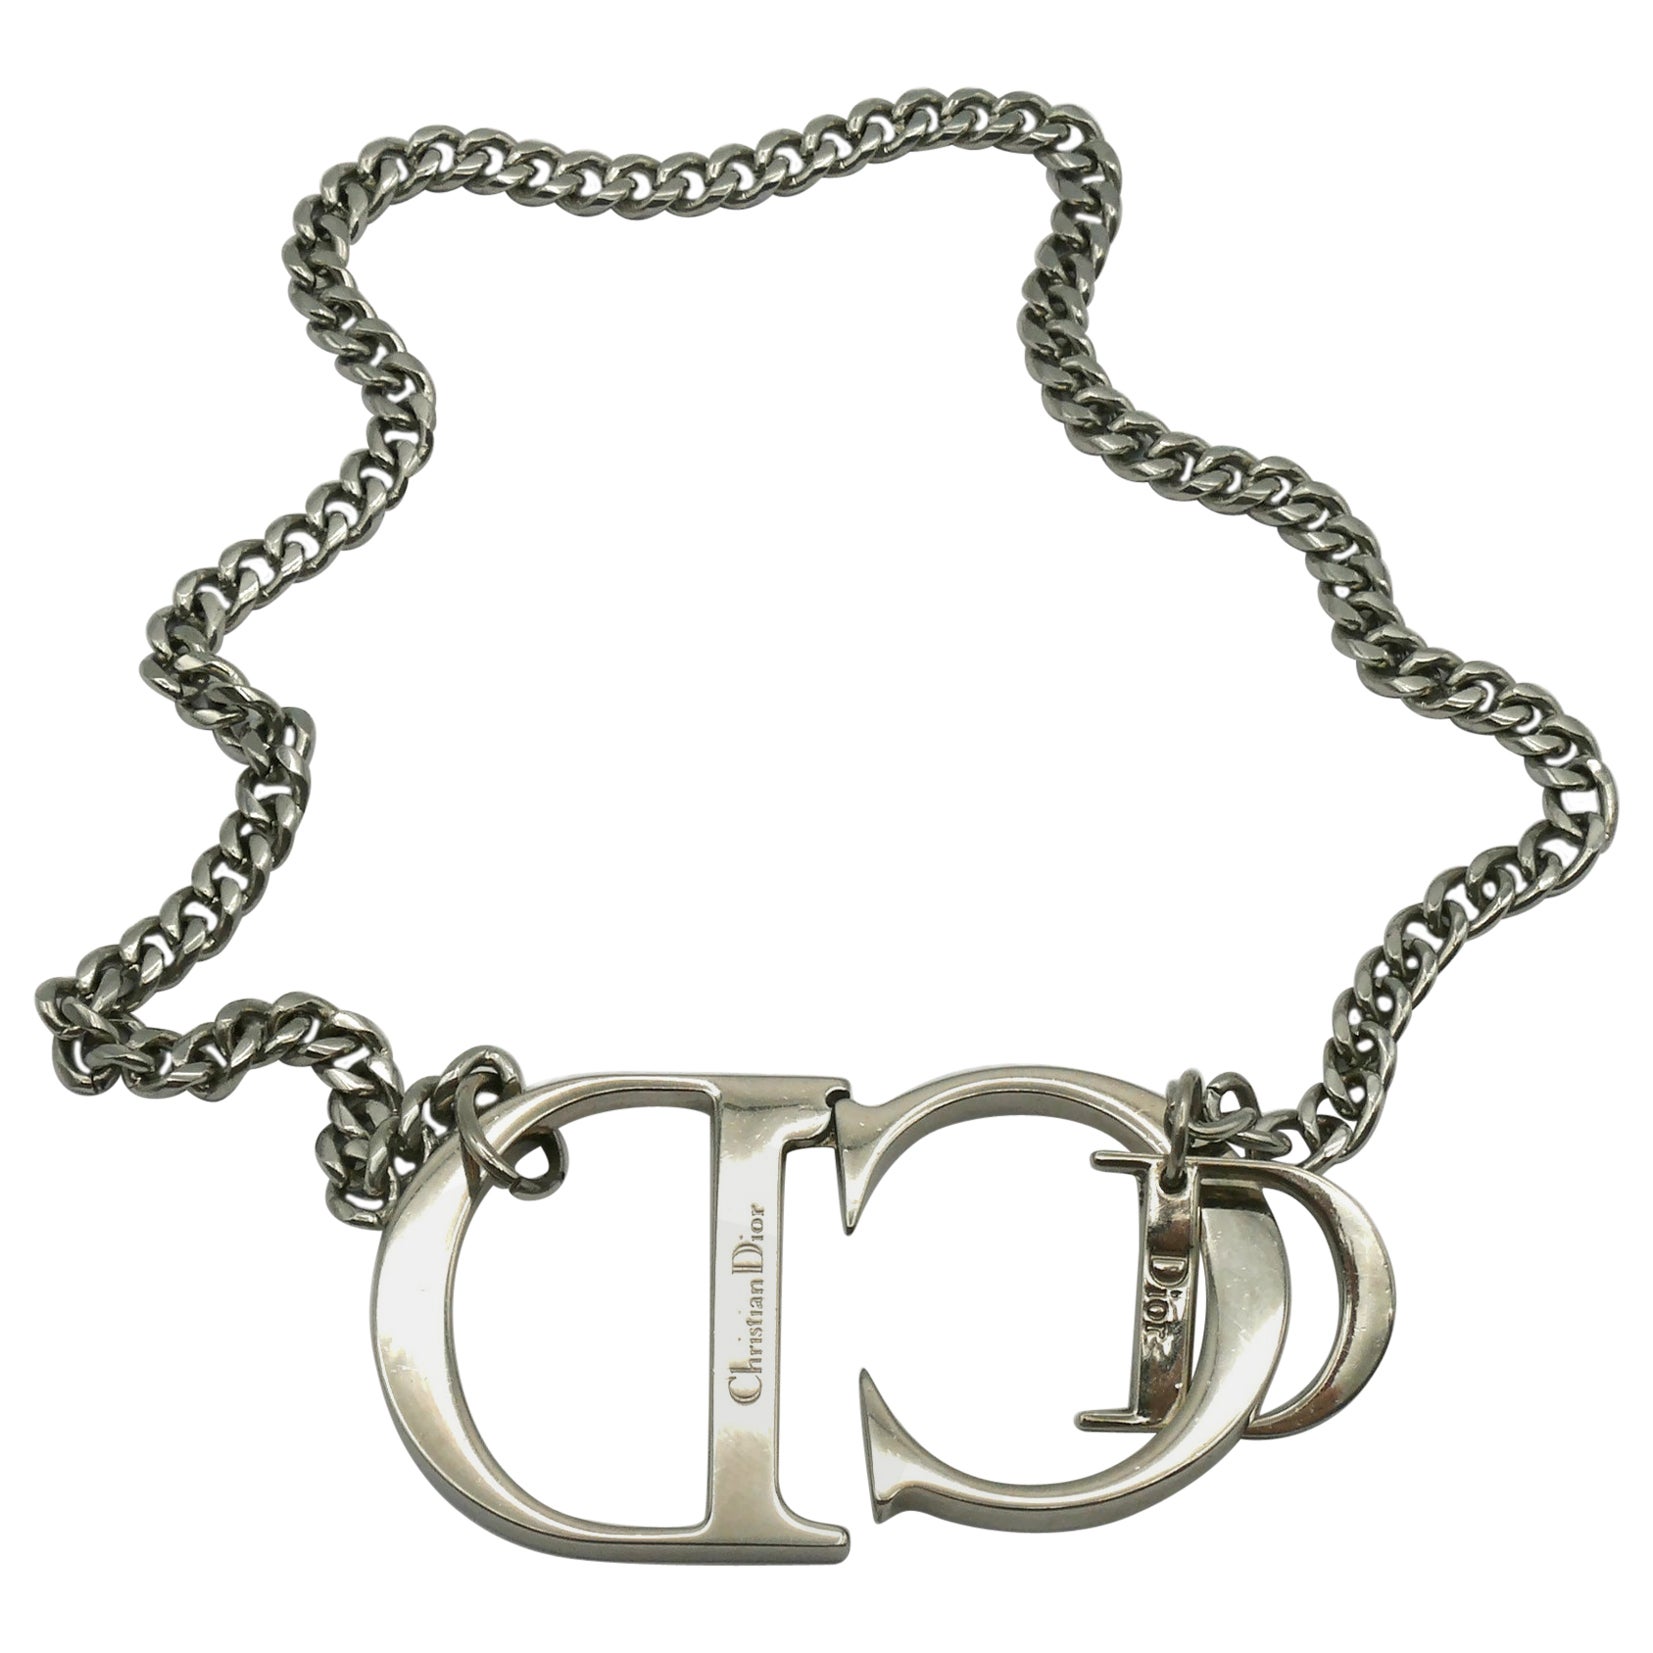 CHRISTIAND DIOR by JOHN GALLIANO Silver Tone CD Chain Necklace For Sale